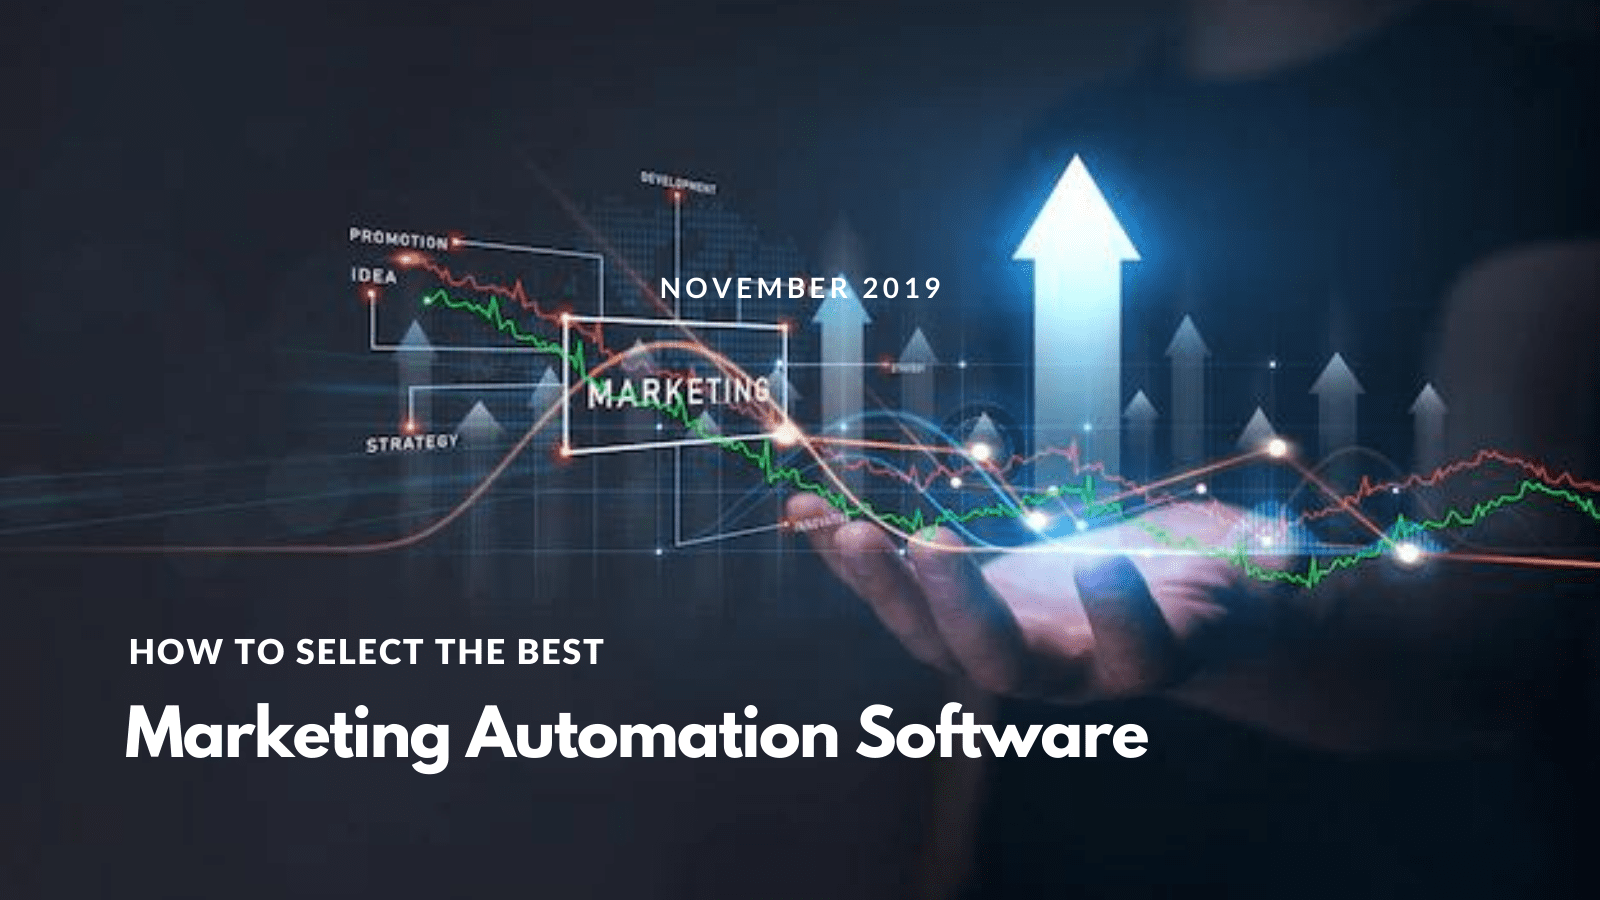 How To Select The Best Marketing Automation Software?